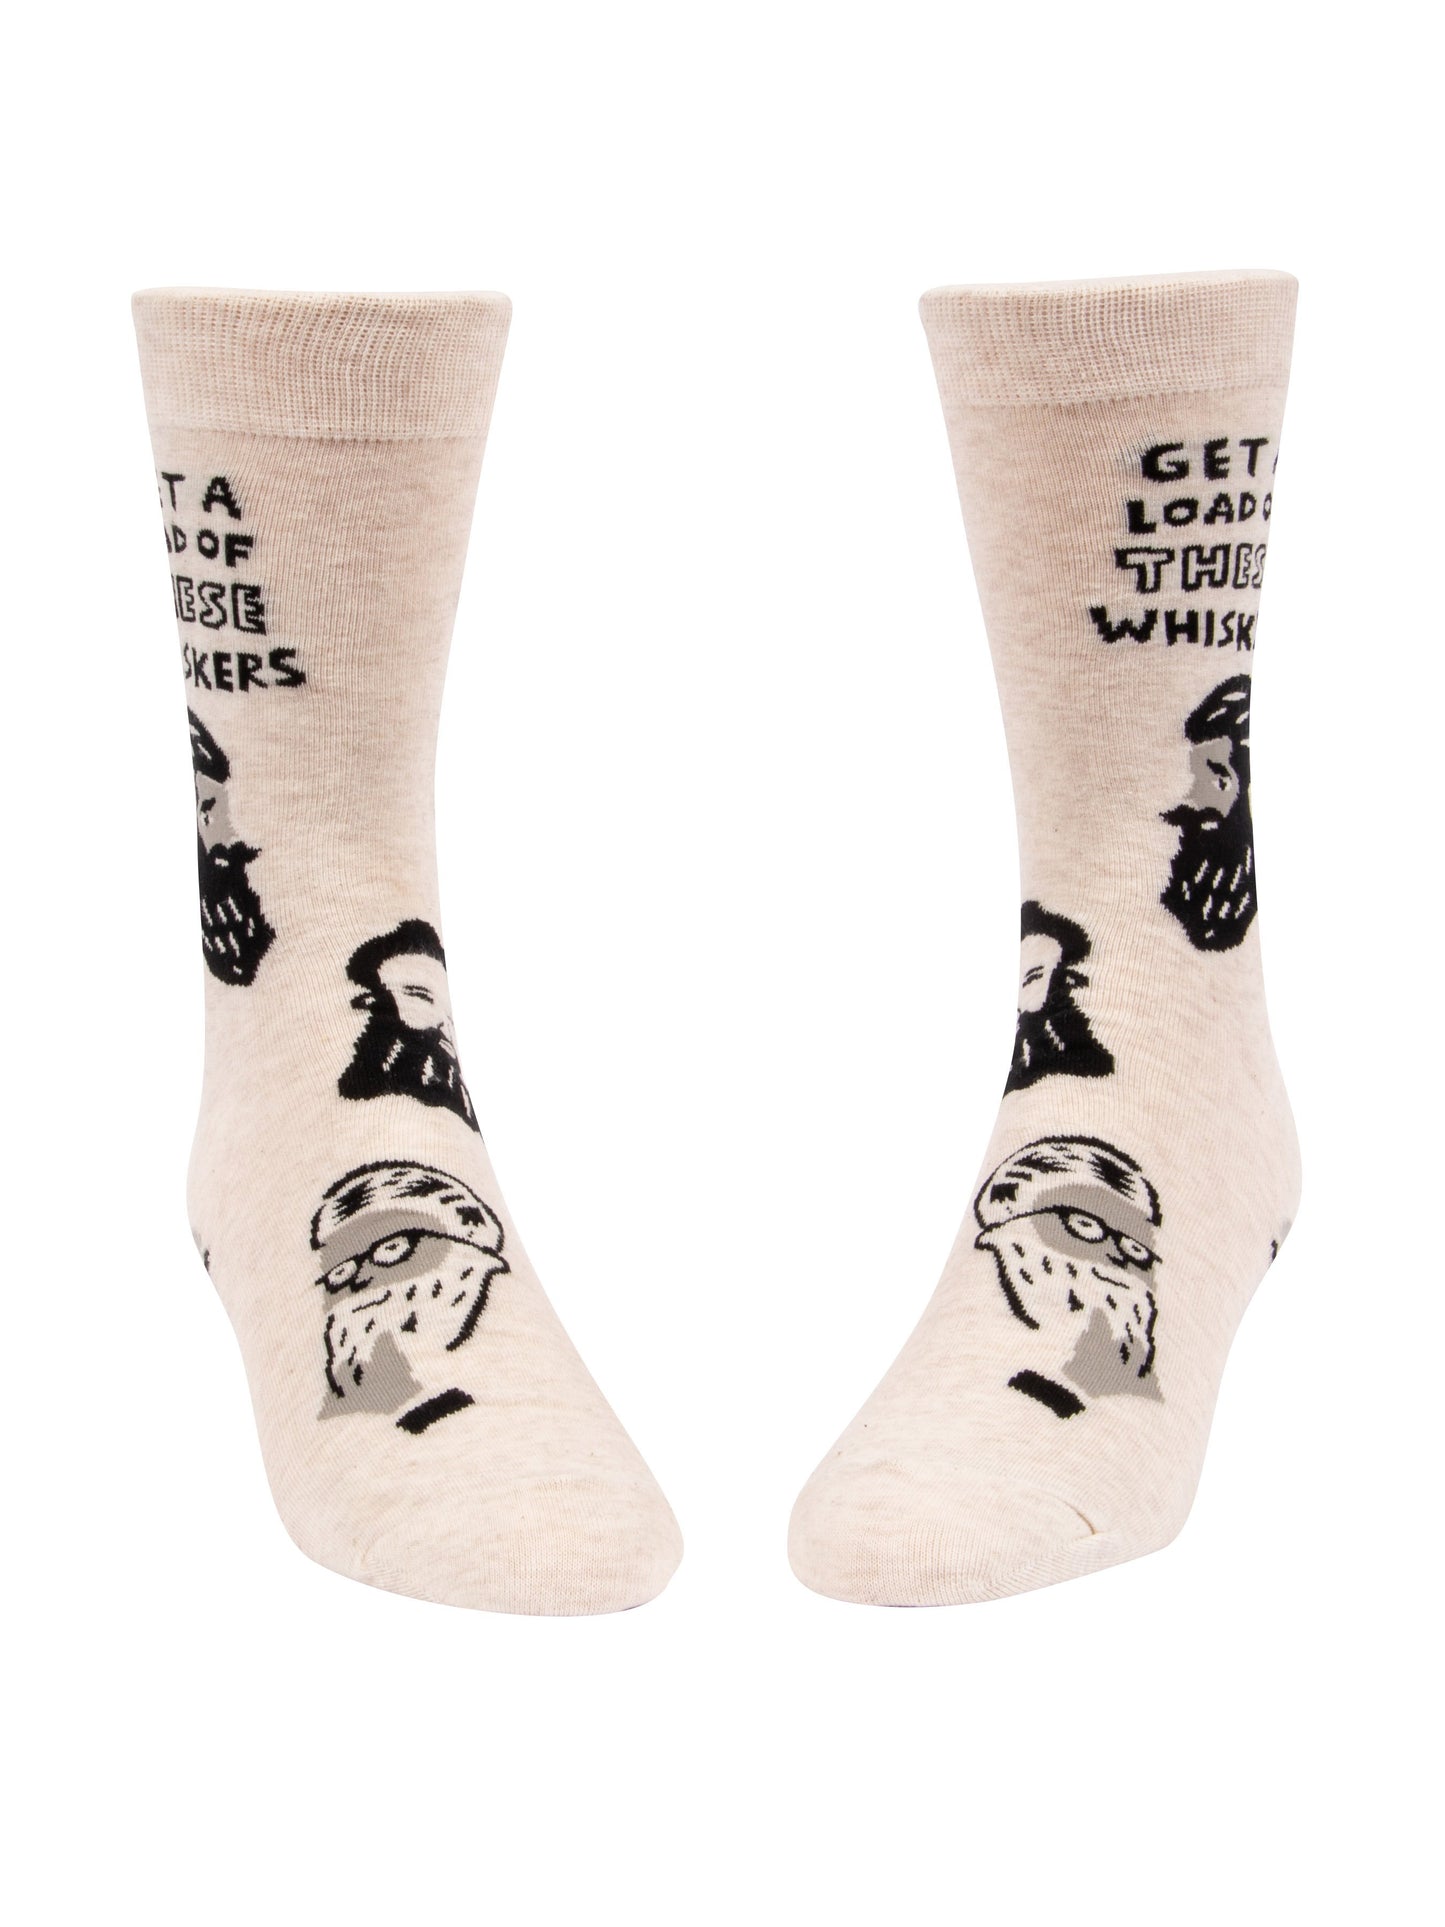 Blue Q - Men's Crew Socks - Get A Load Of These Whiskers